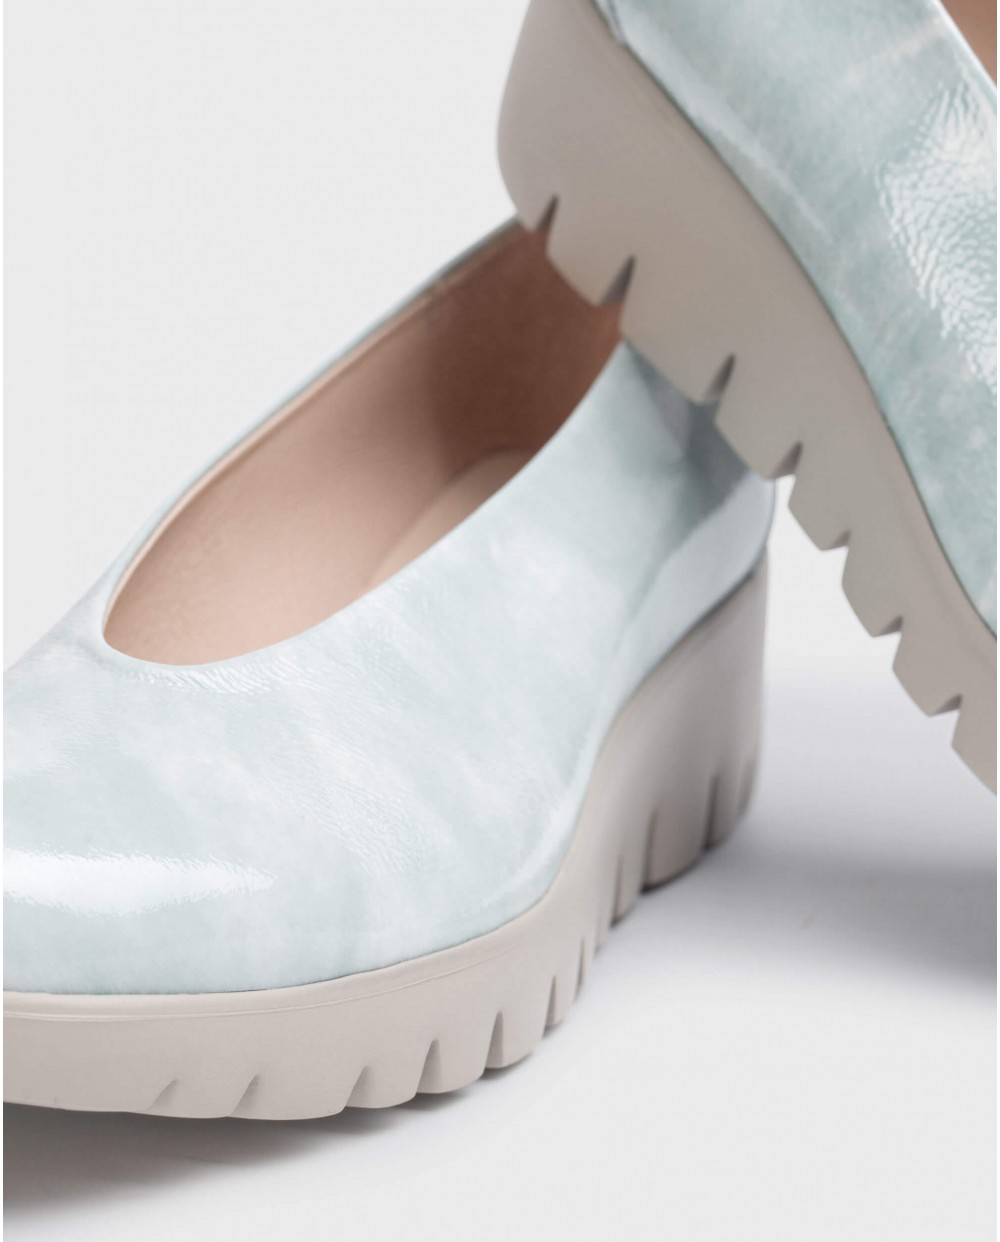 Wonders-Wedges-Blue Fly Moccasin